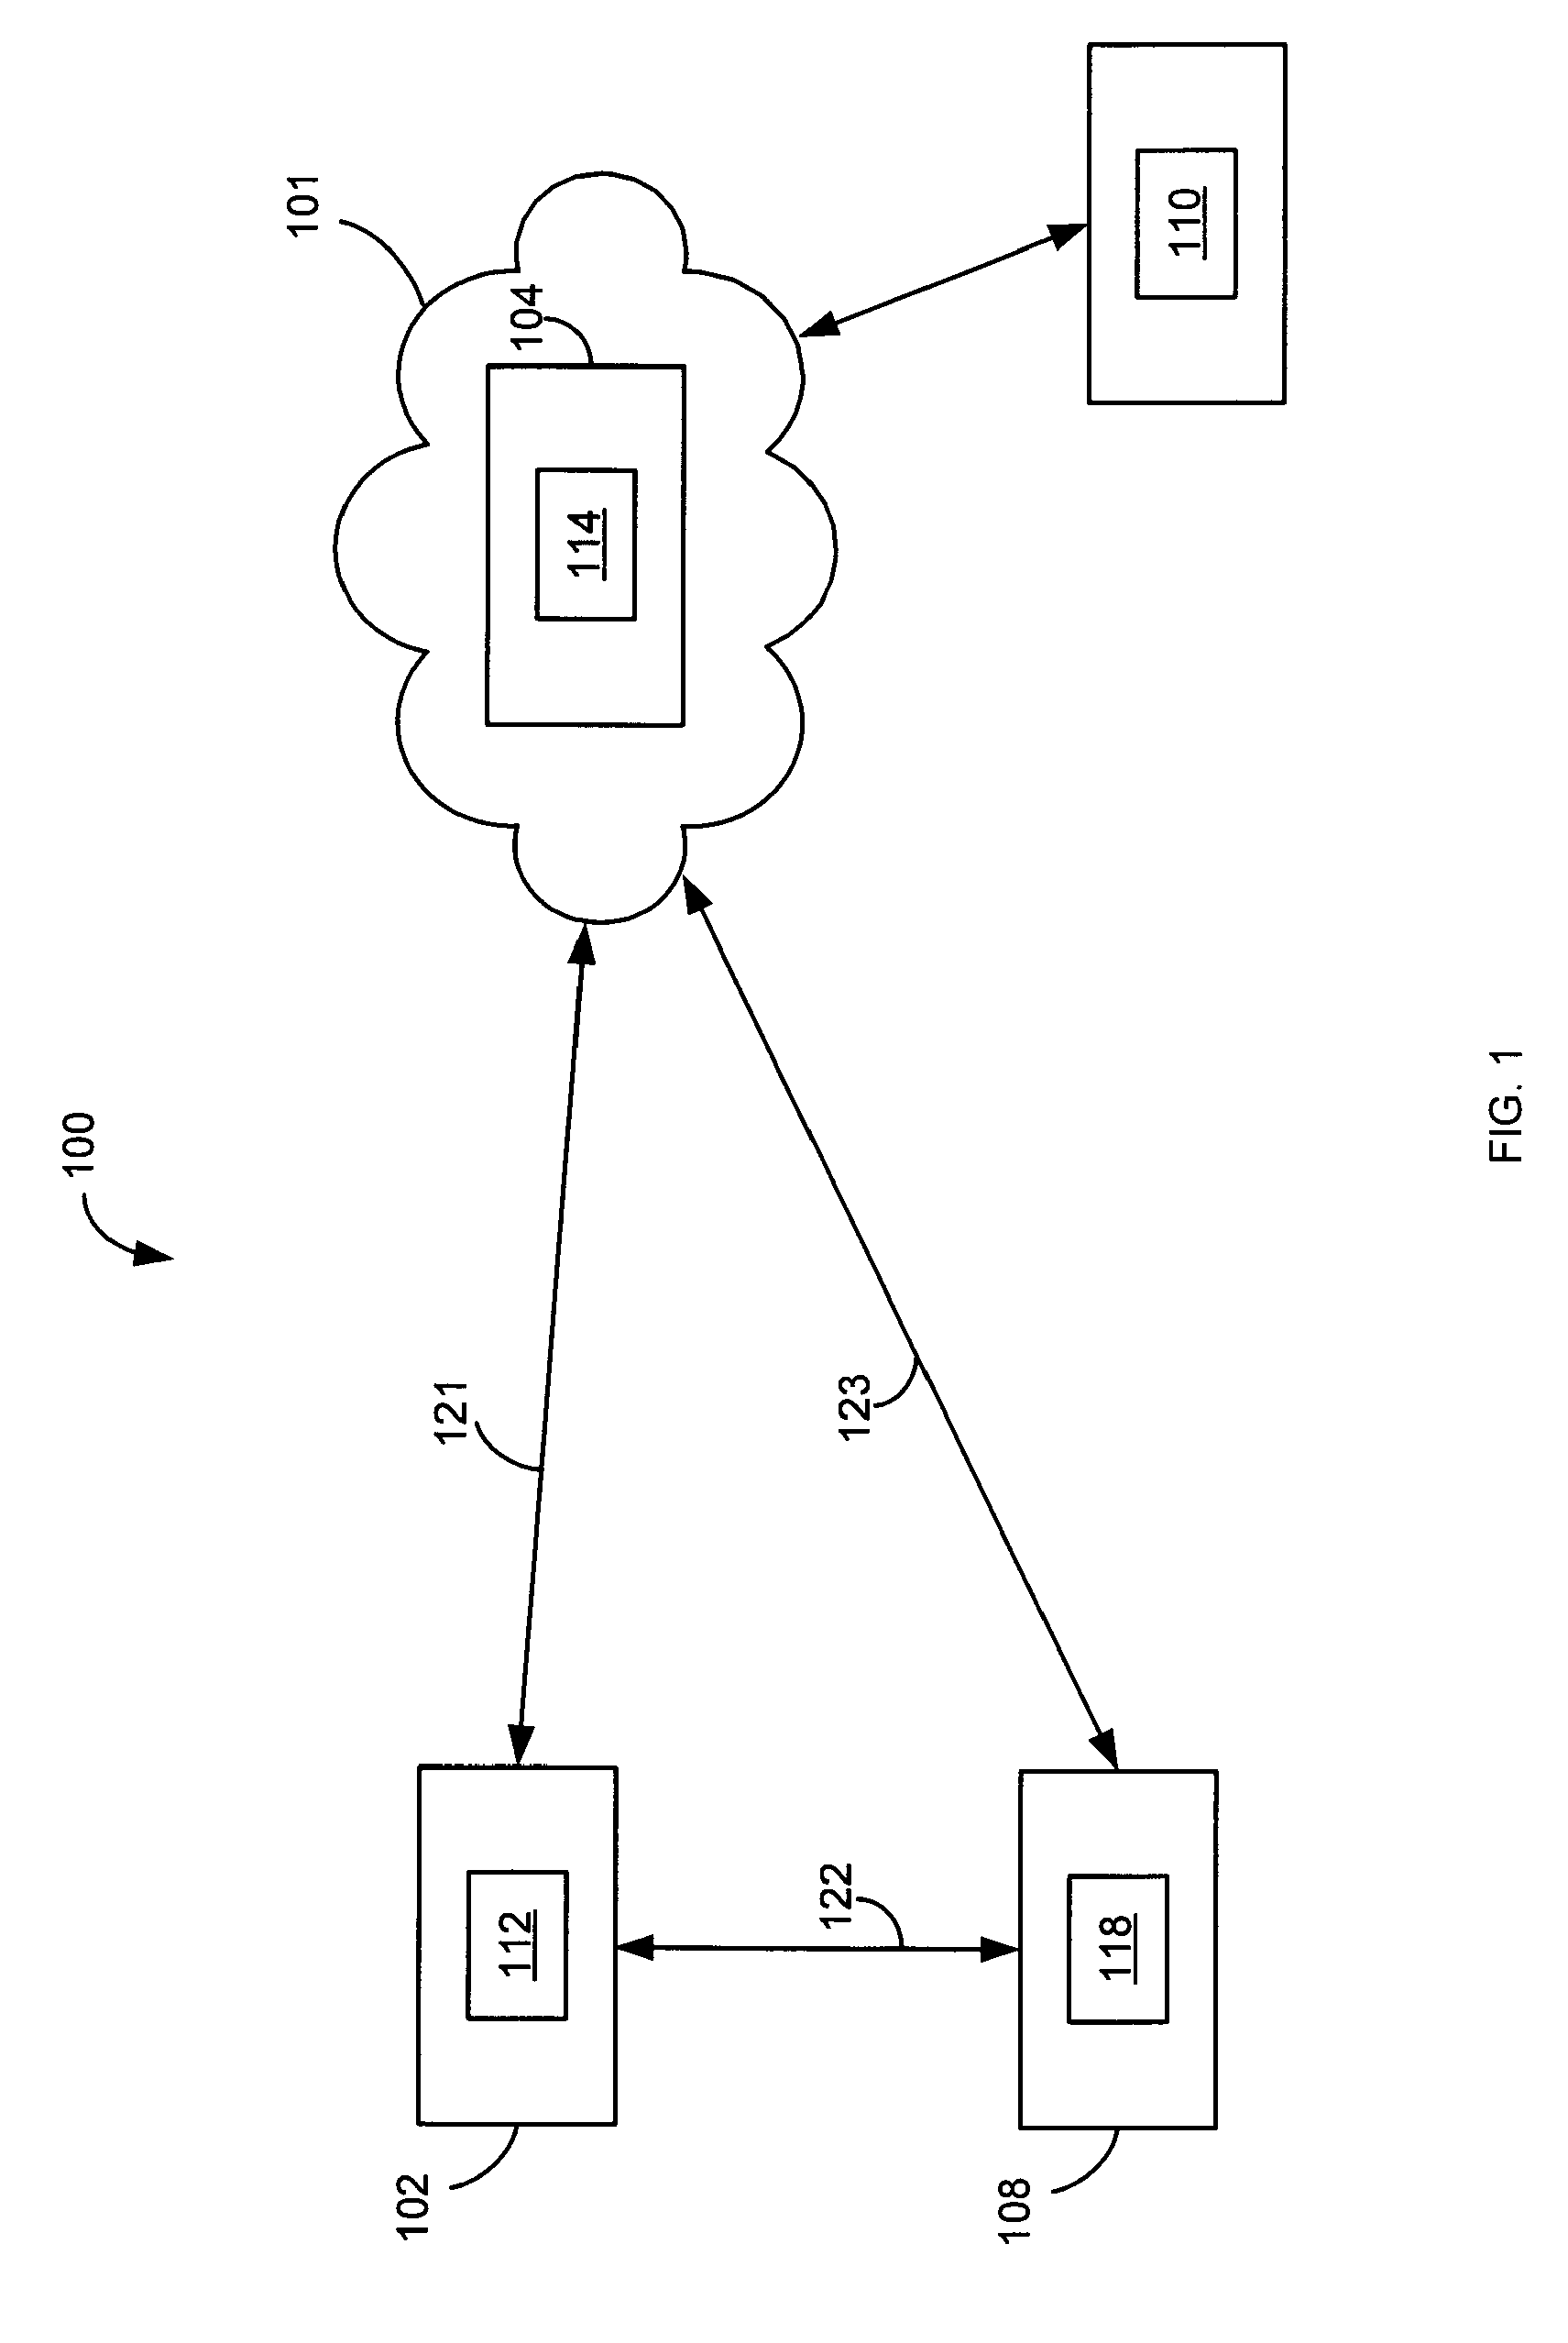 System and Method for Communicating Enterprise Information via Hybrid and Peer-to-Peer Cloud Networks